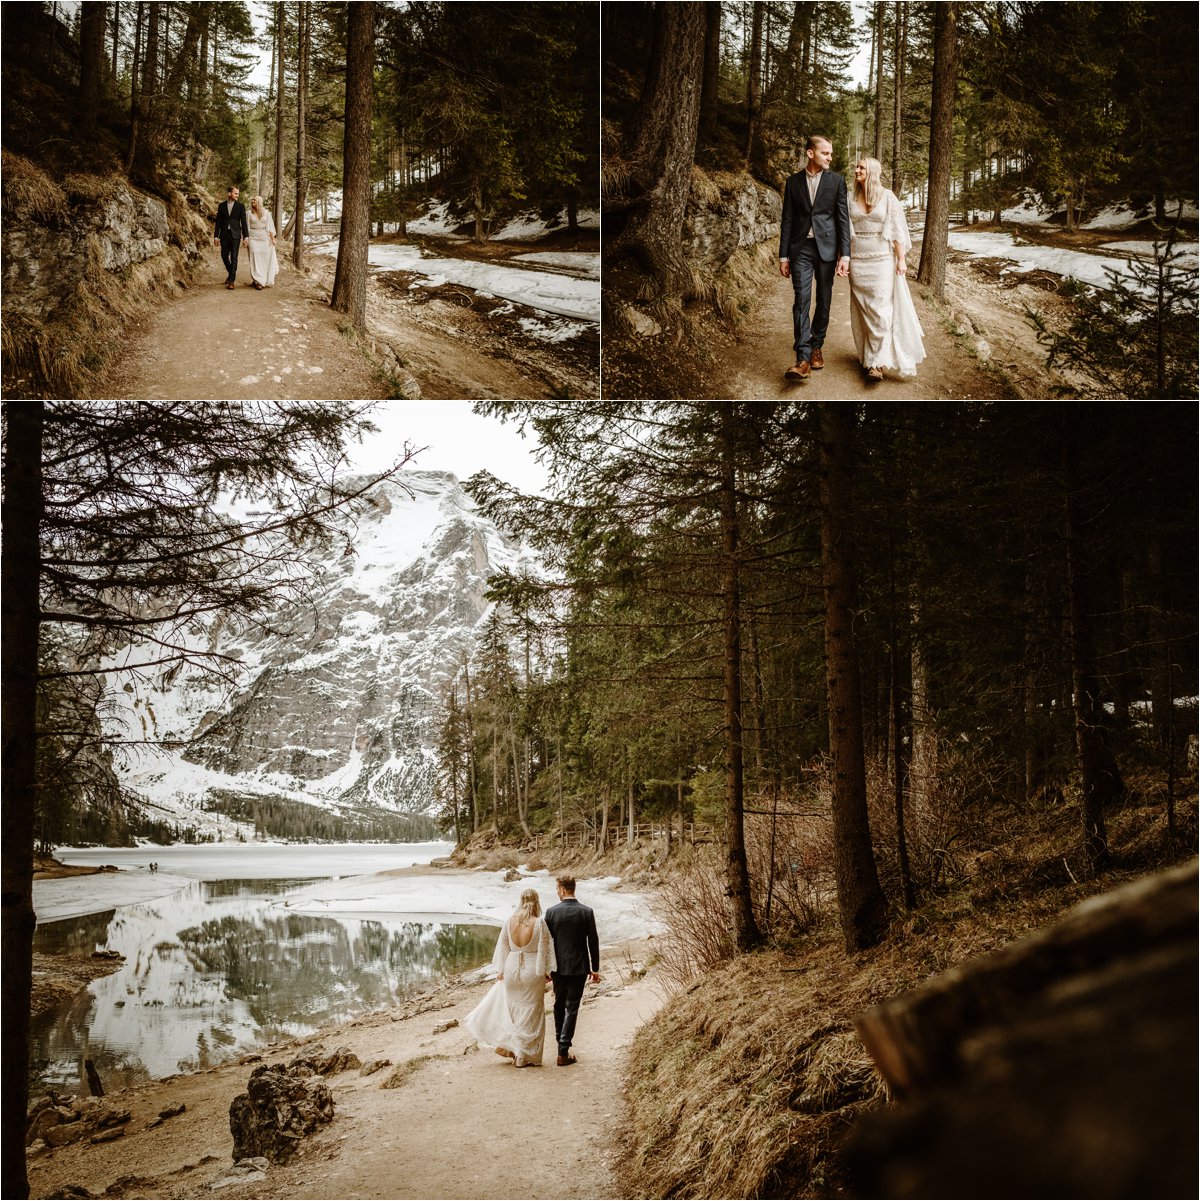 Erika & Nathan explore the footpaths that lead around the edge of Lago di Braies, Pragser Wildsee lake in the Dolomites. Photos by Wild Connections Photography - Alps & Dolomites Elopement Photographer